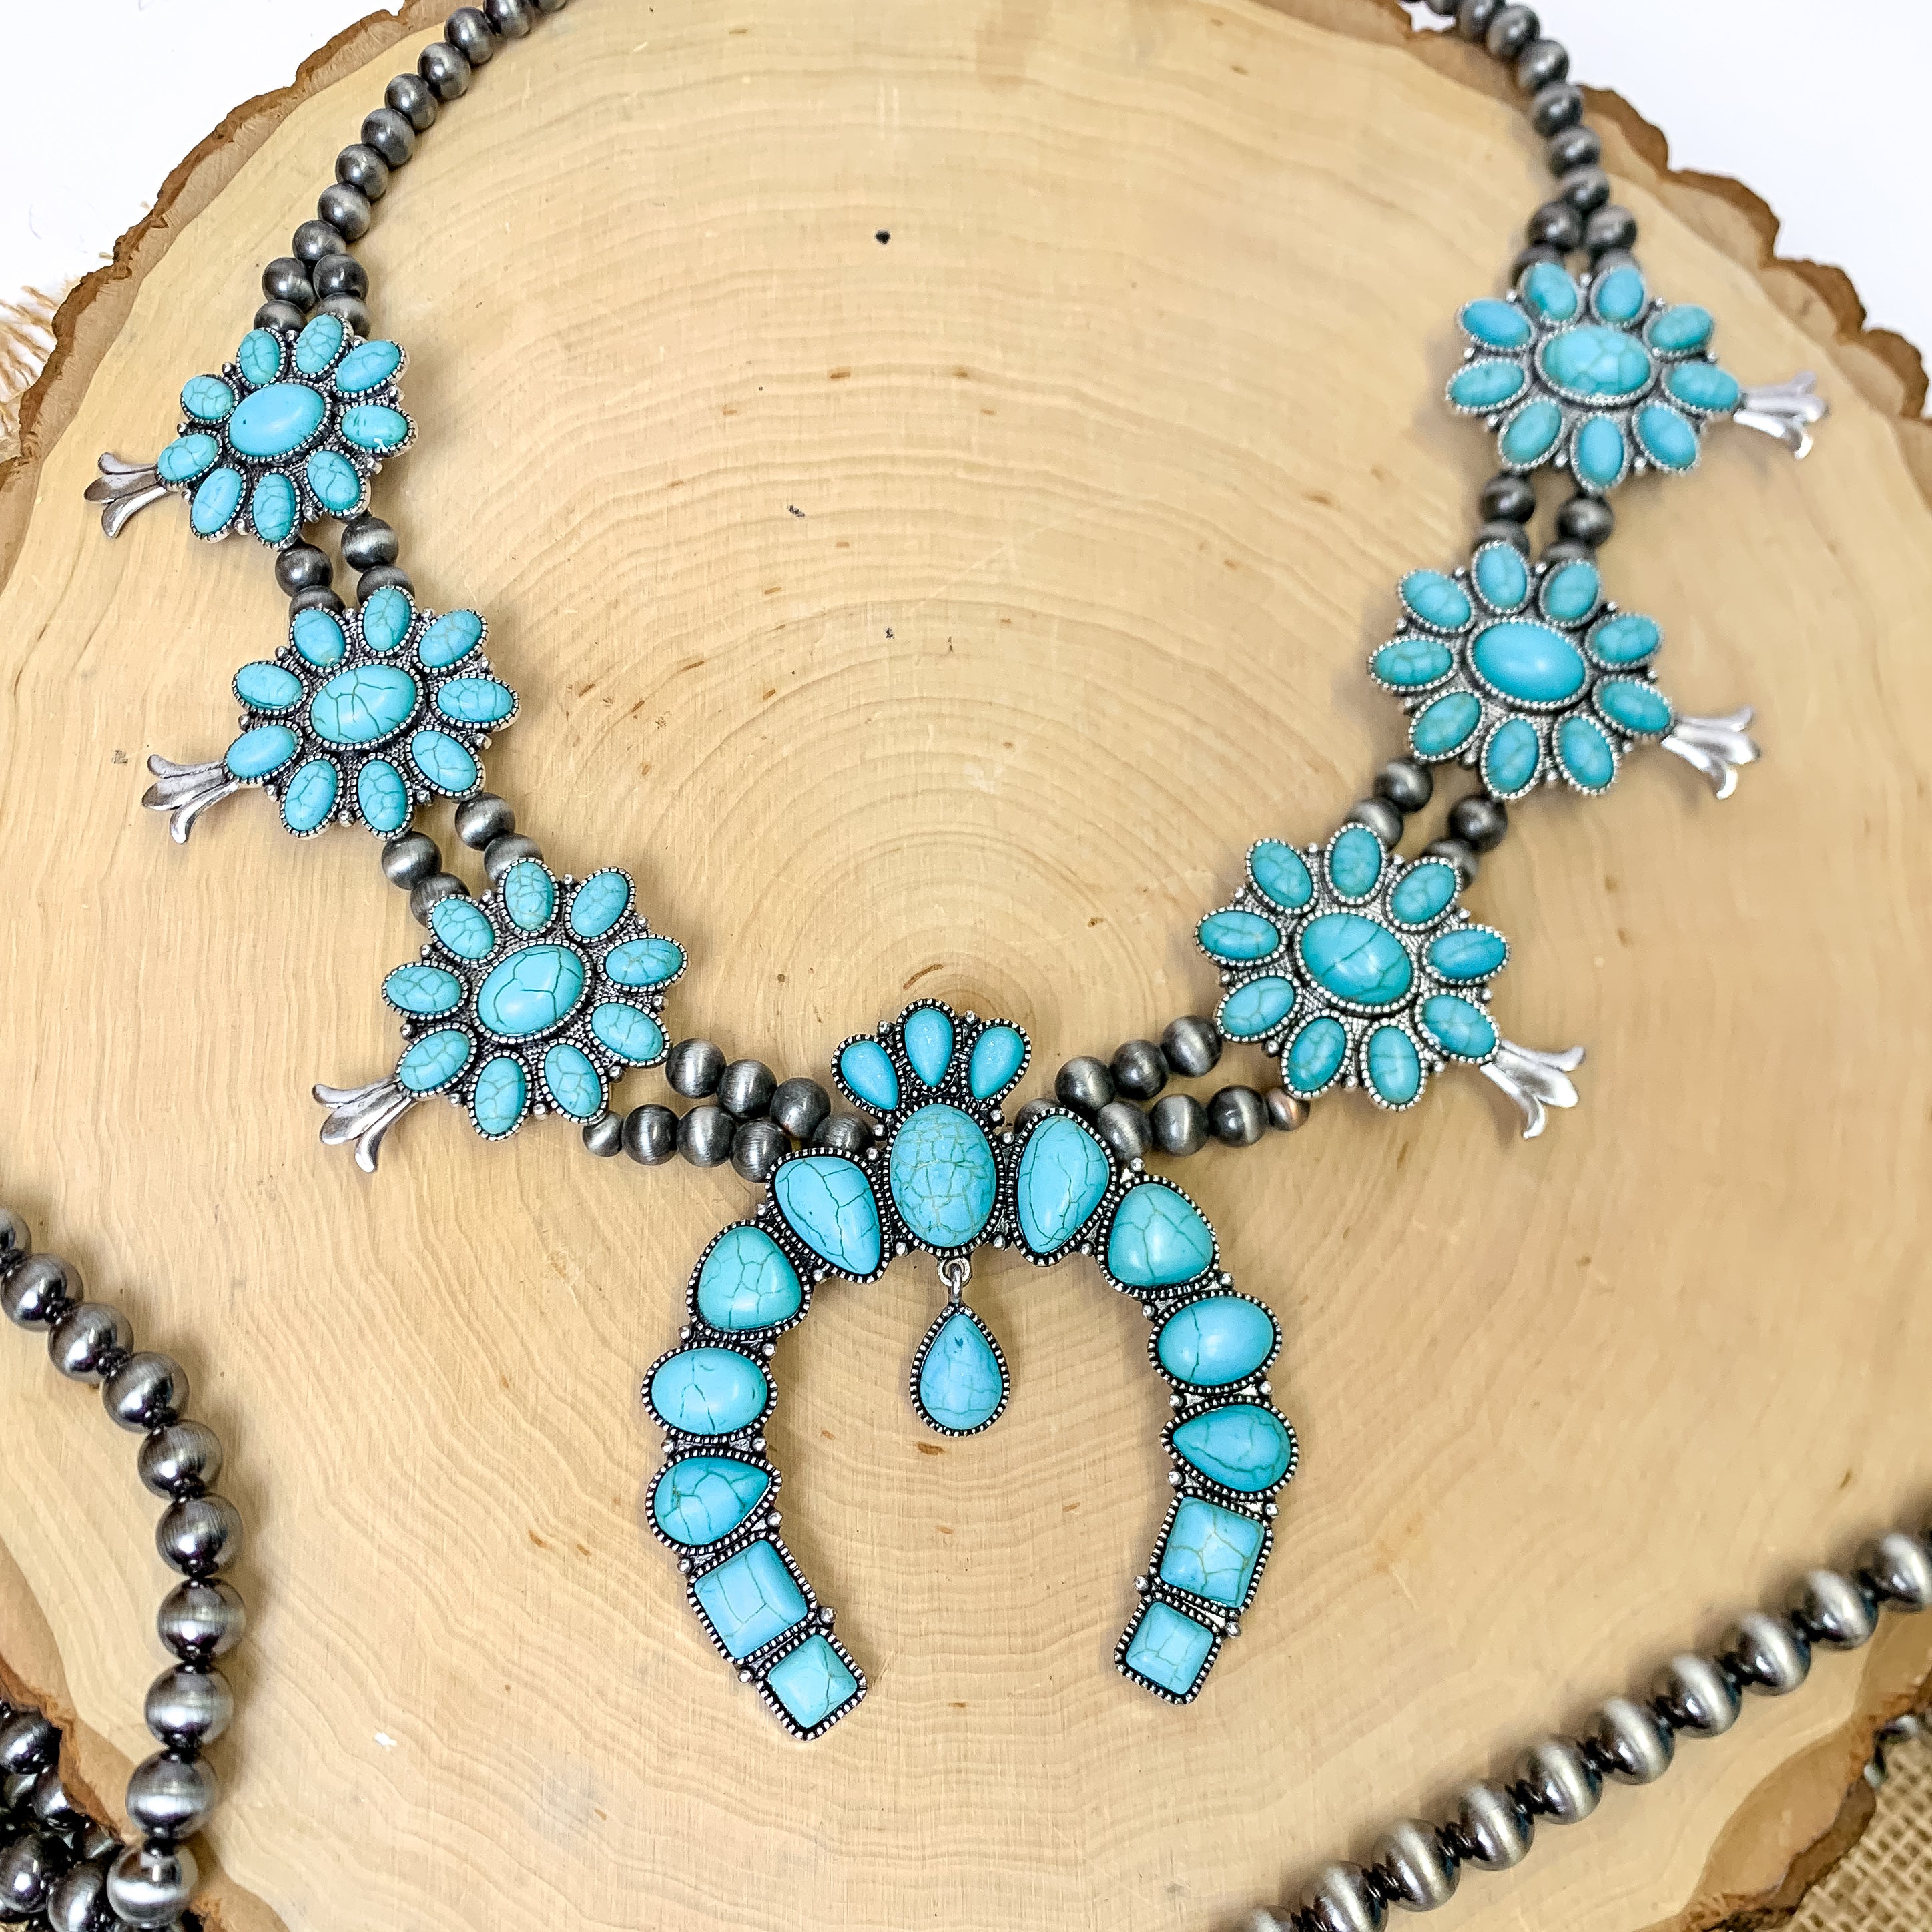 Squash Blossom Necklace with Naja Pendant in Turquoise Blue